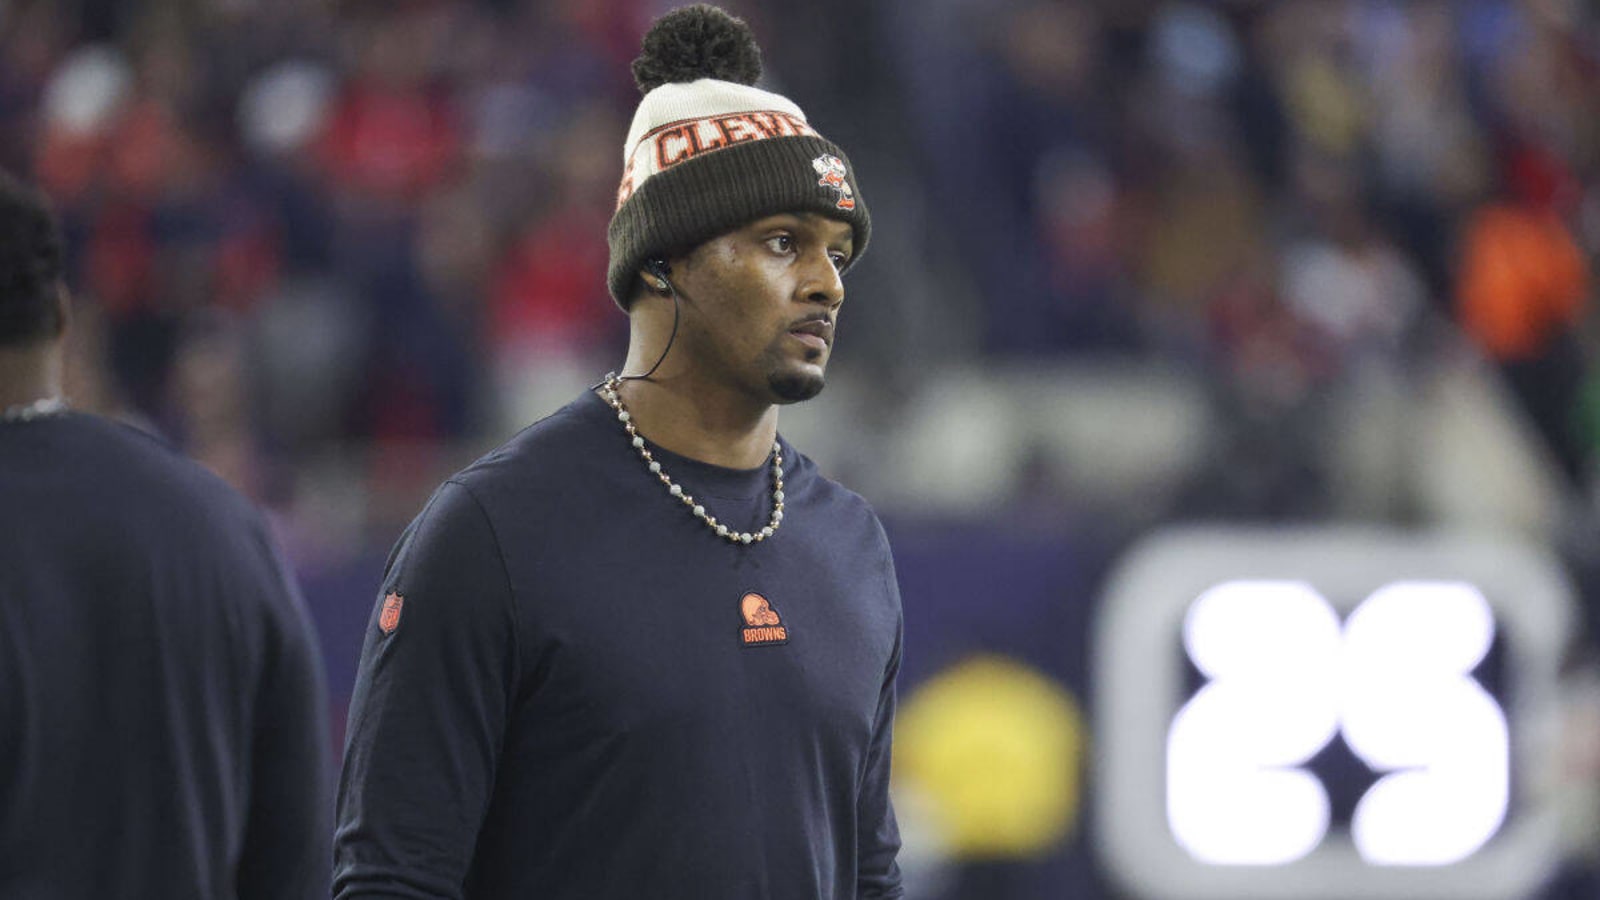 Former Super Bowl champion roasts Deshaun Watson ahead of most consequential season of his Cleveland Browns career